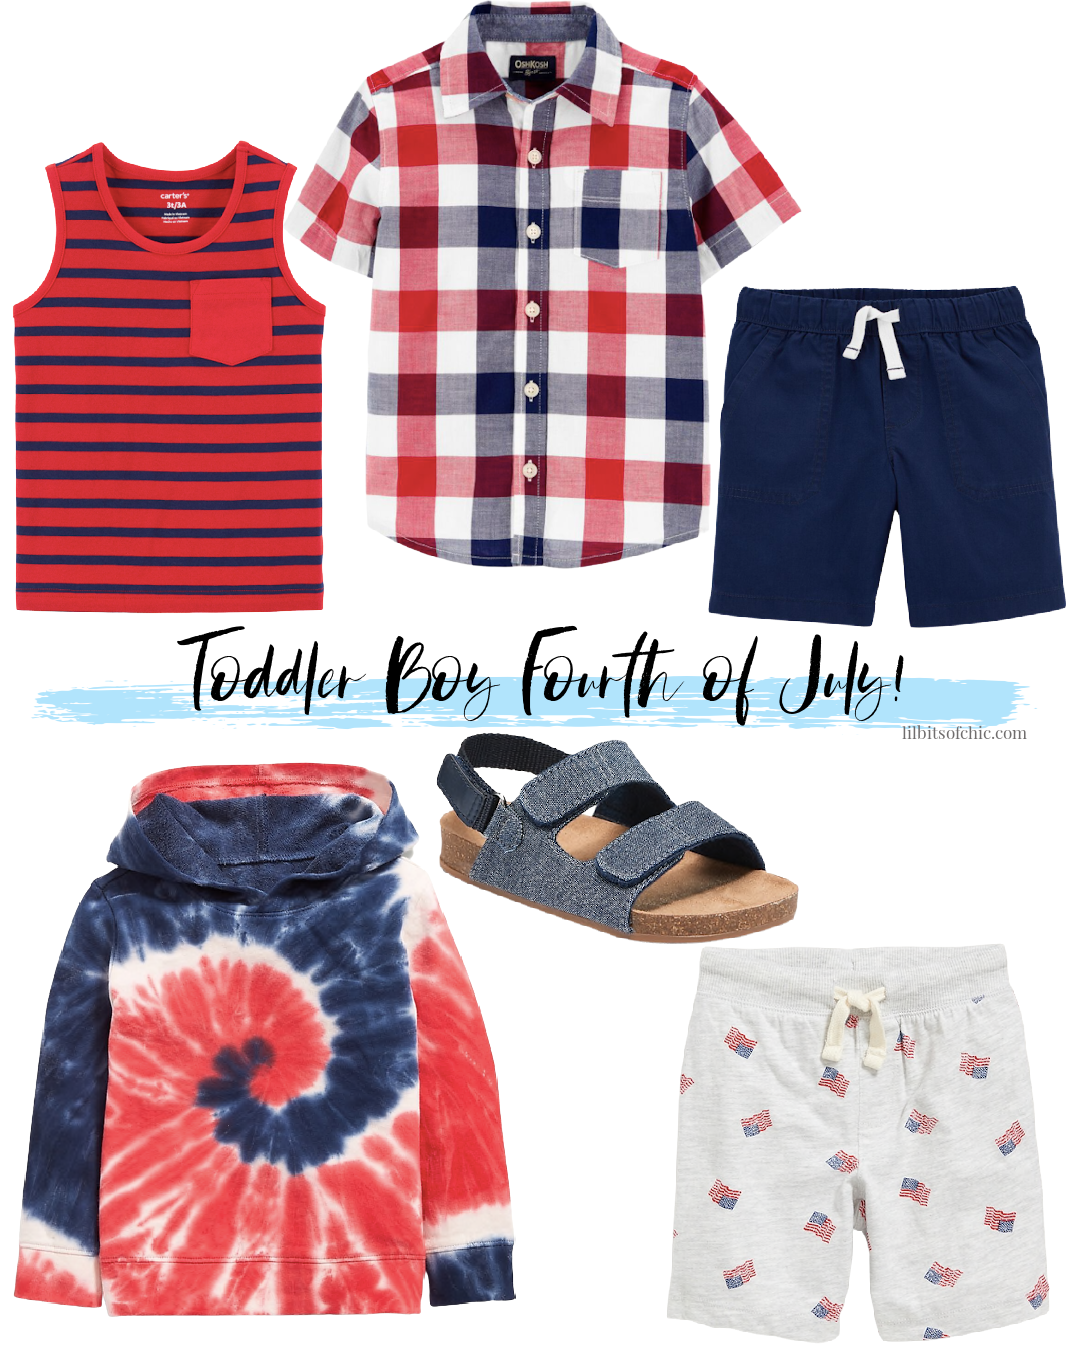 Toddler boy fourth of July outfits, Fourth of July Outfit Ideas for baby girl and toddler boy